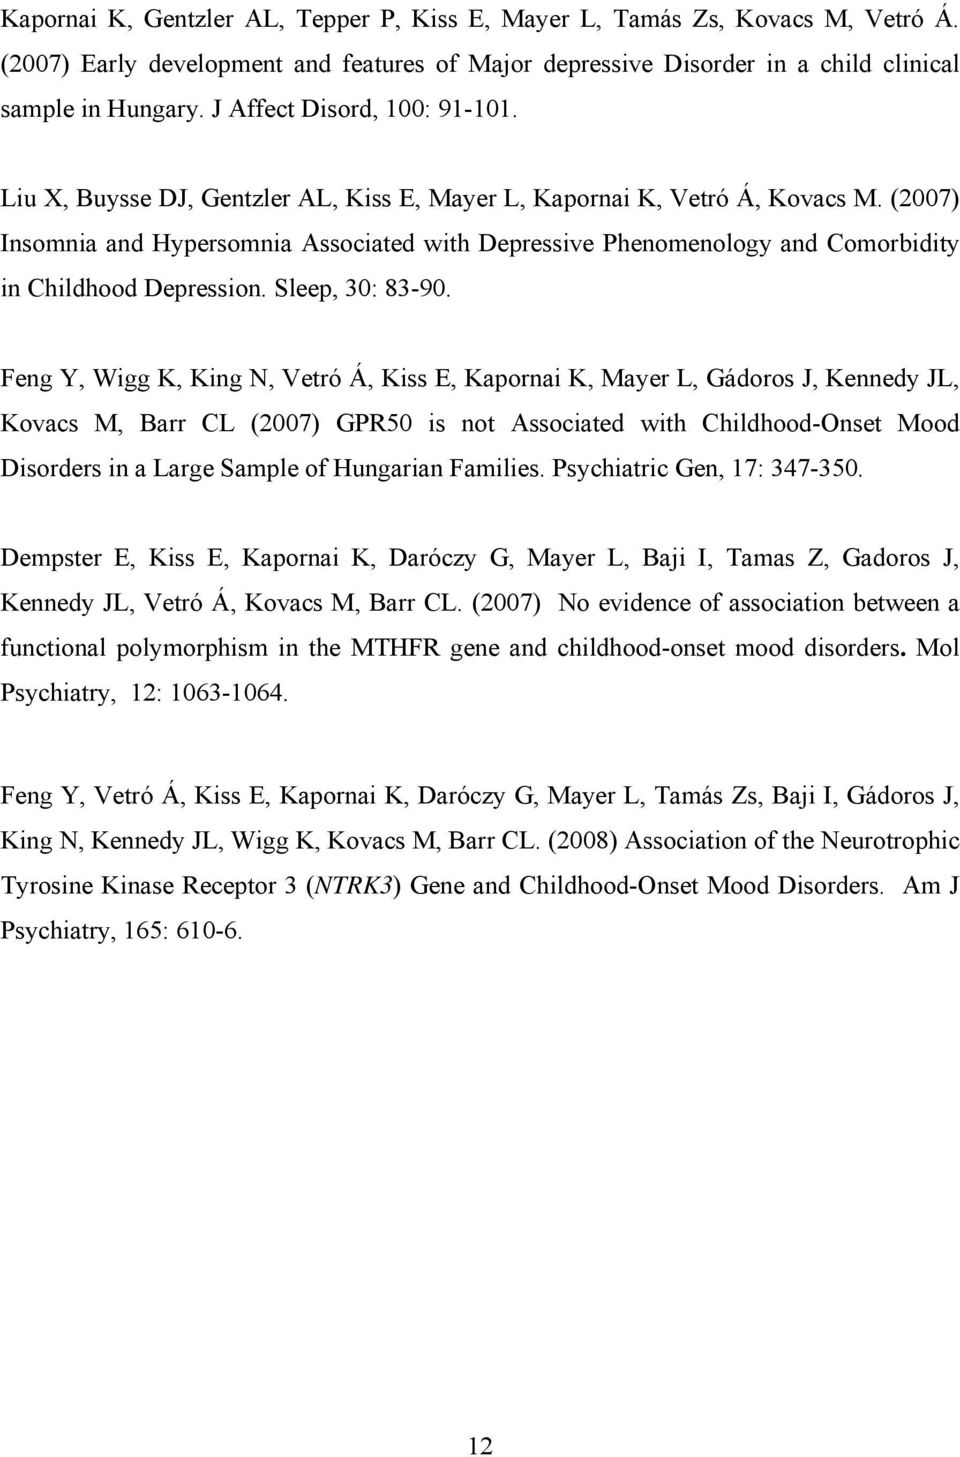 (2007) Insomnia and Hypersomnia Associated with Depressive Phenomenology and Comorbidity in Childhood Depression. Sleep, 30: 83-90.